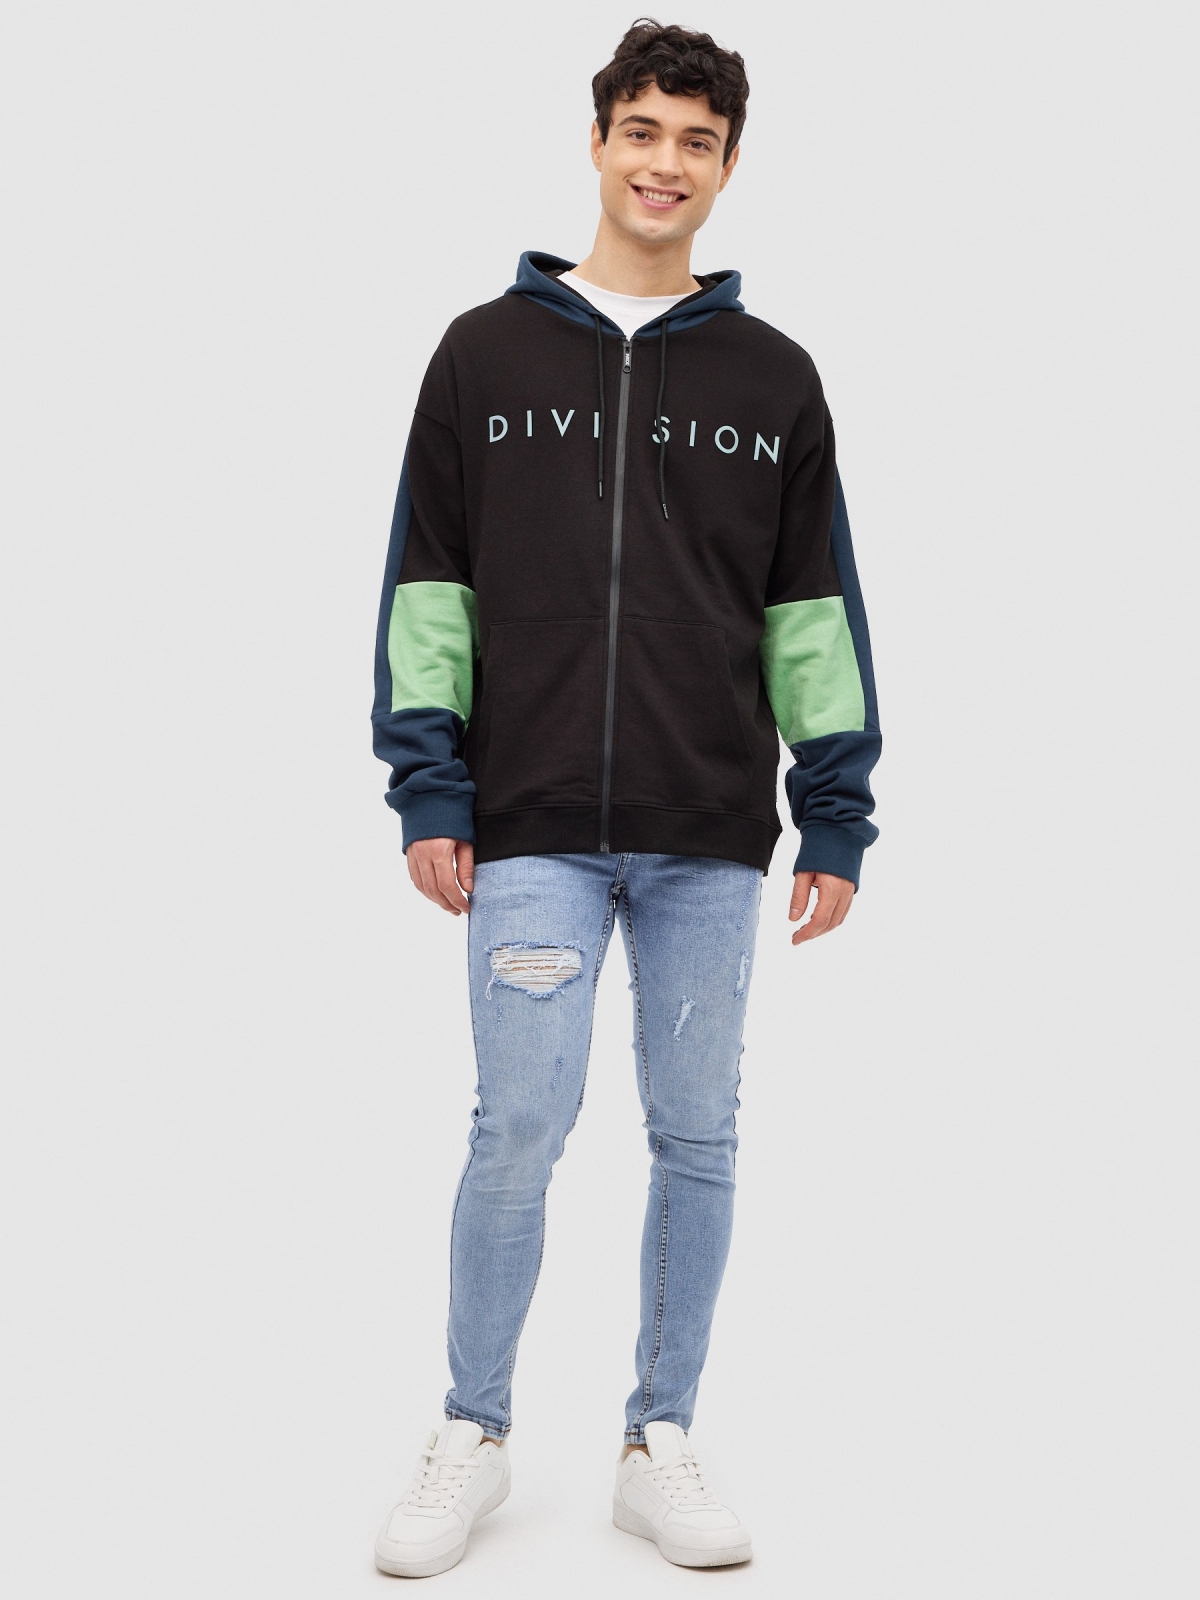 Division hooded sweatshirt black front view